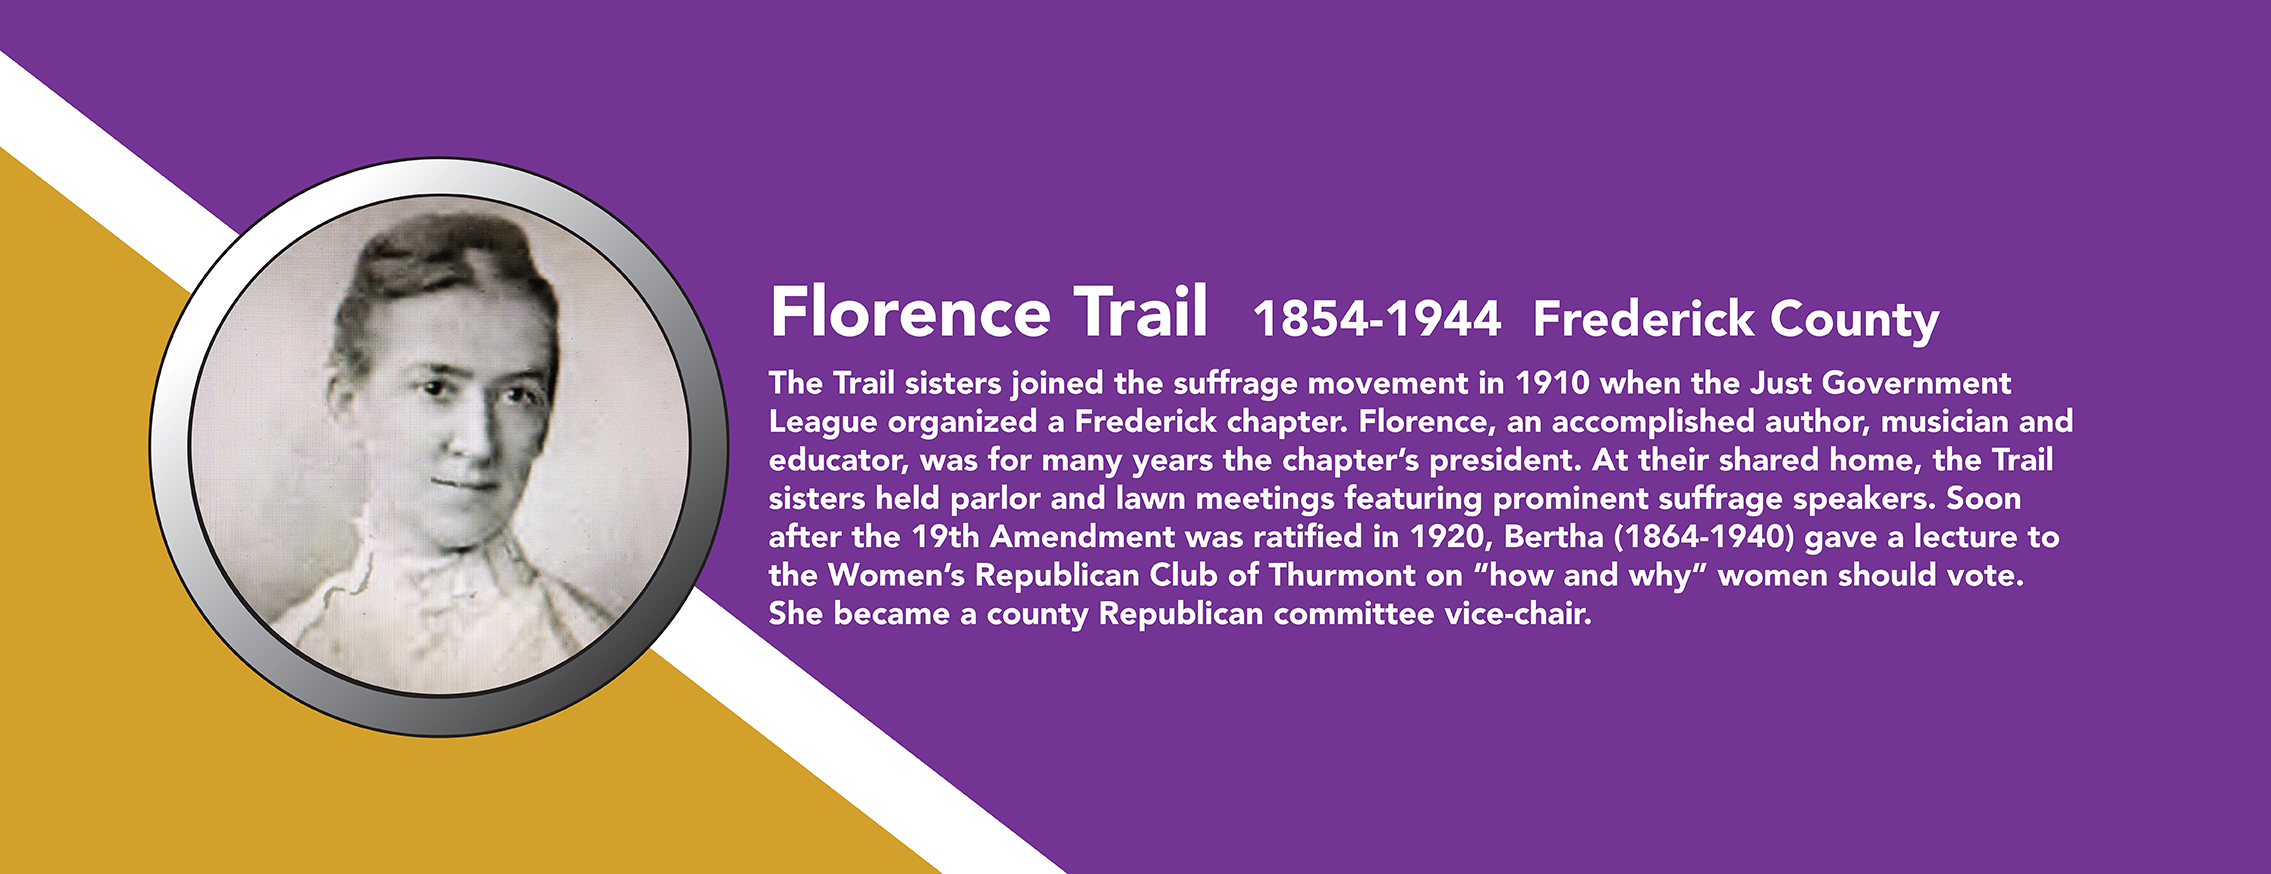 Florence Trail